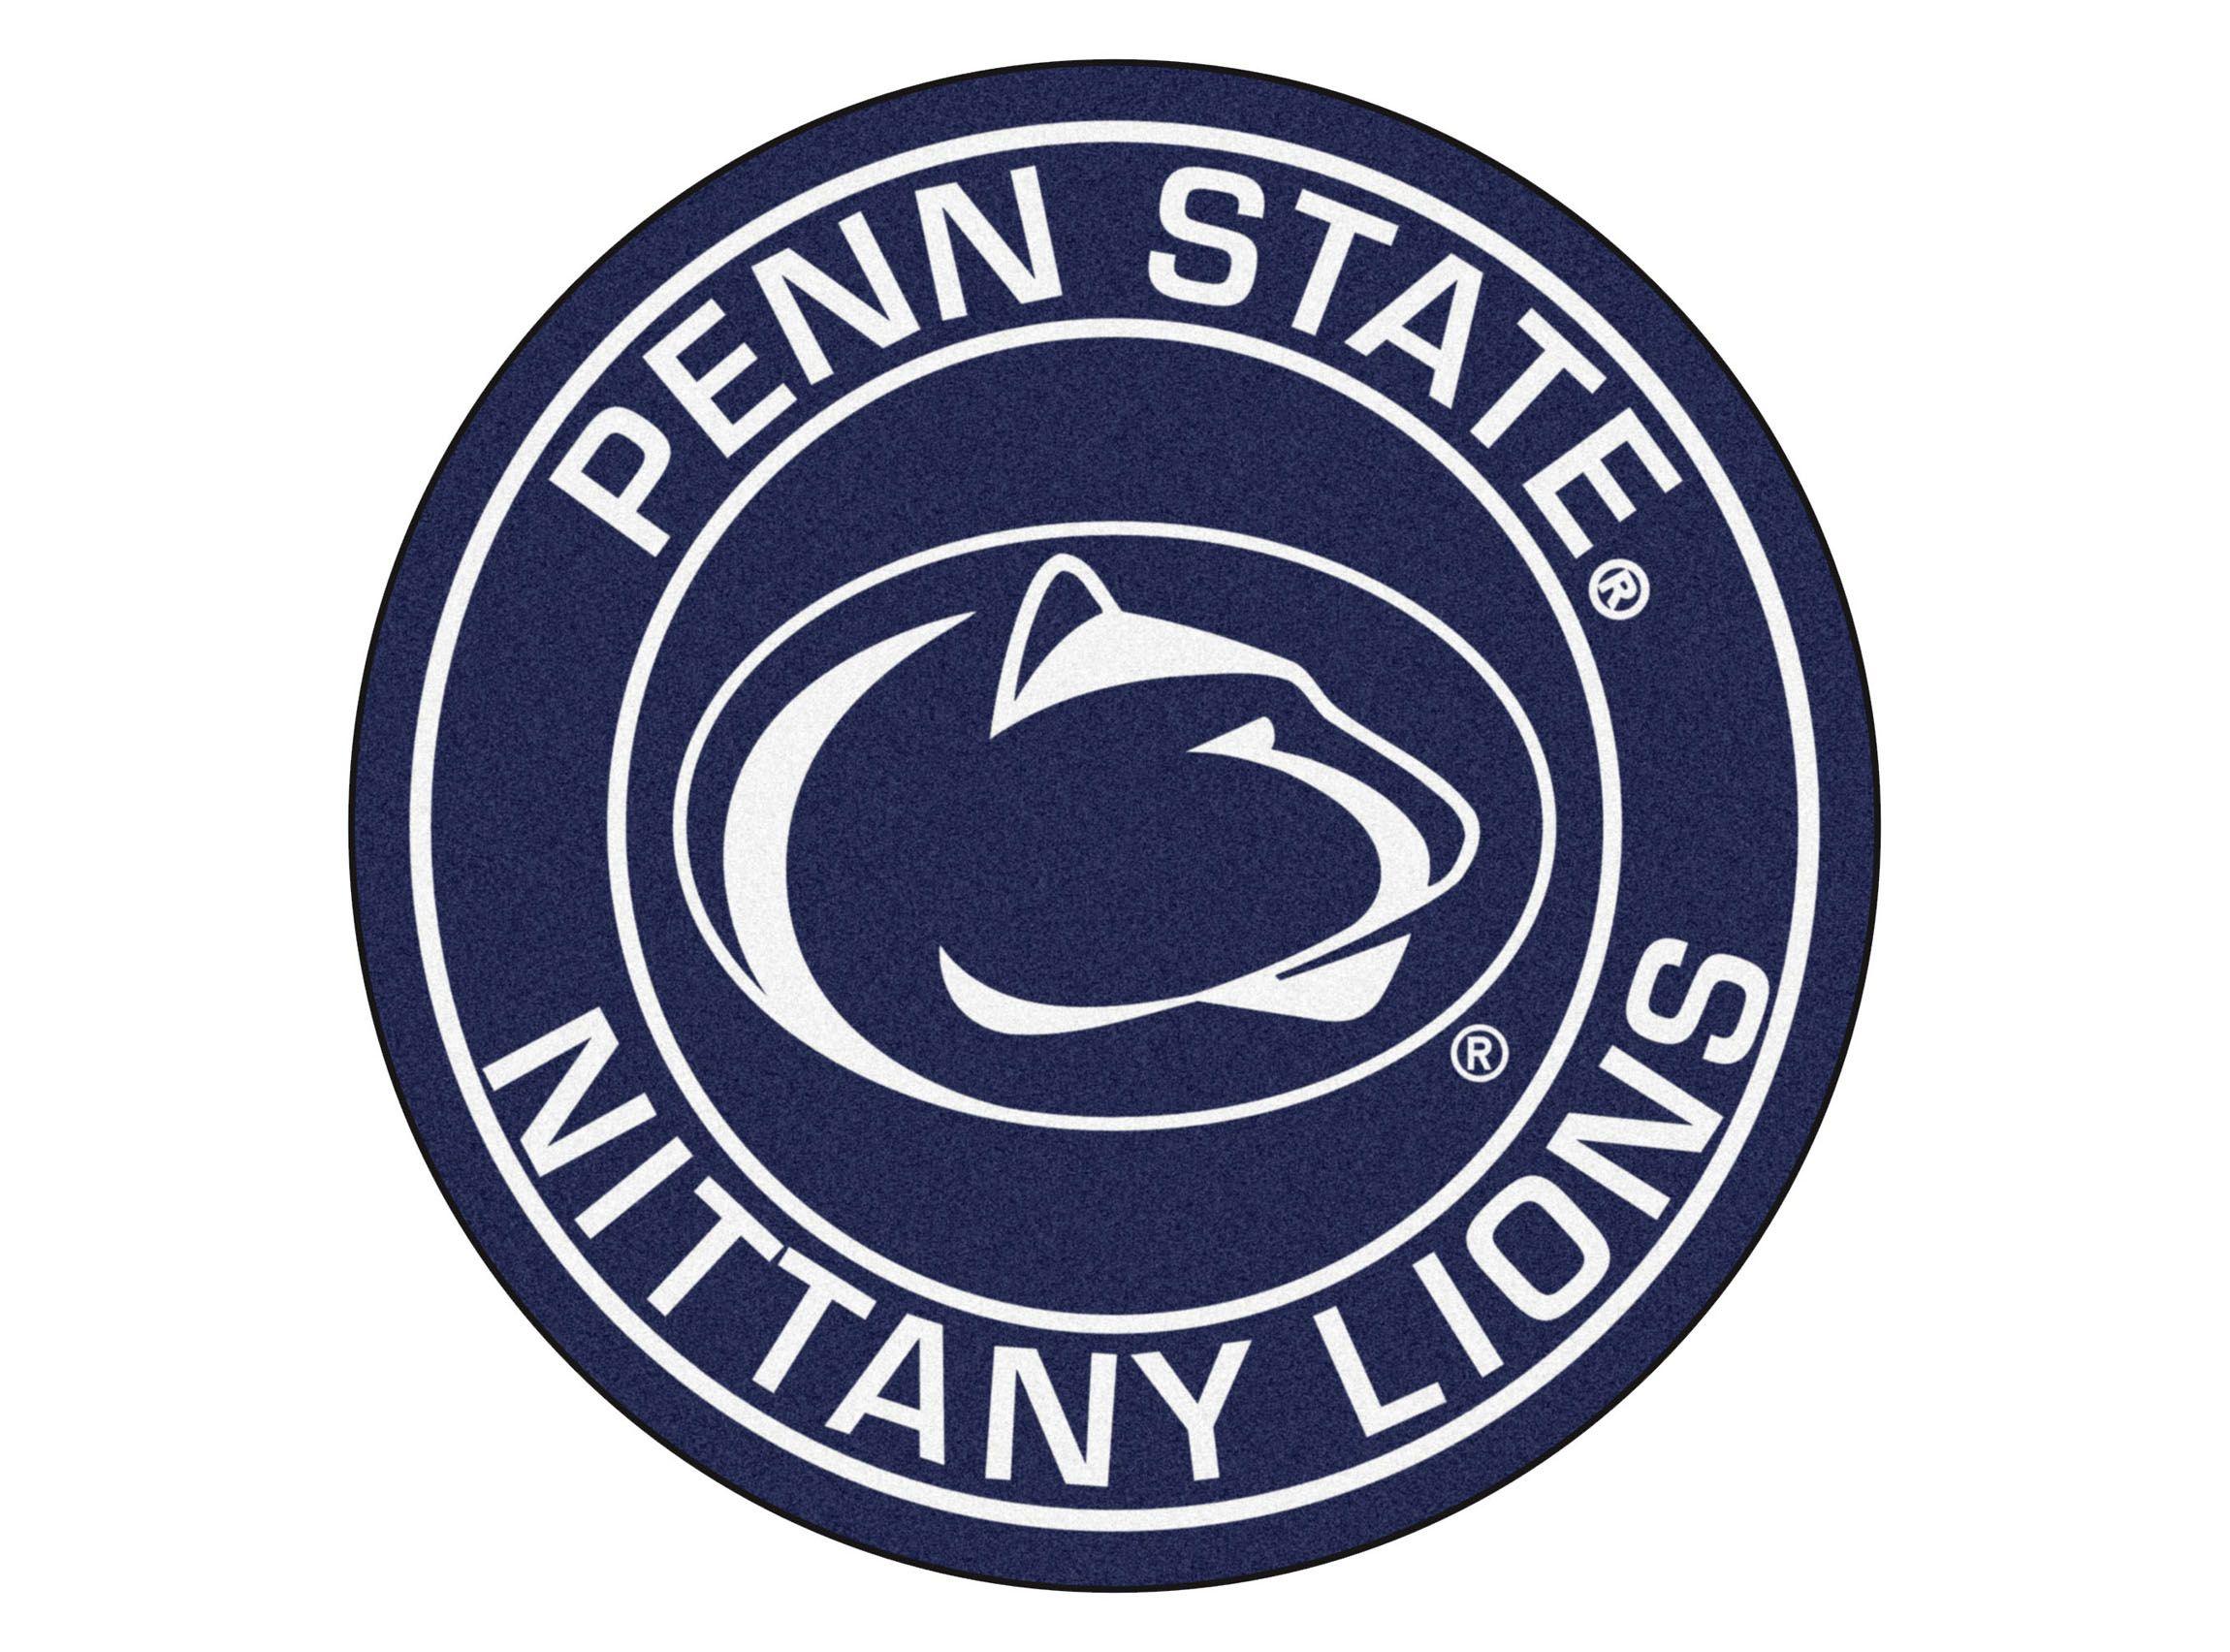 Penn State Logo - Penn State Logo, Penn State Symbol, Meaning, History and Evolution